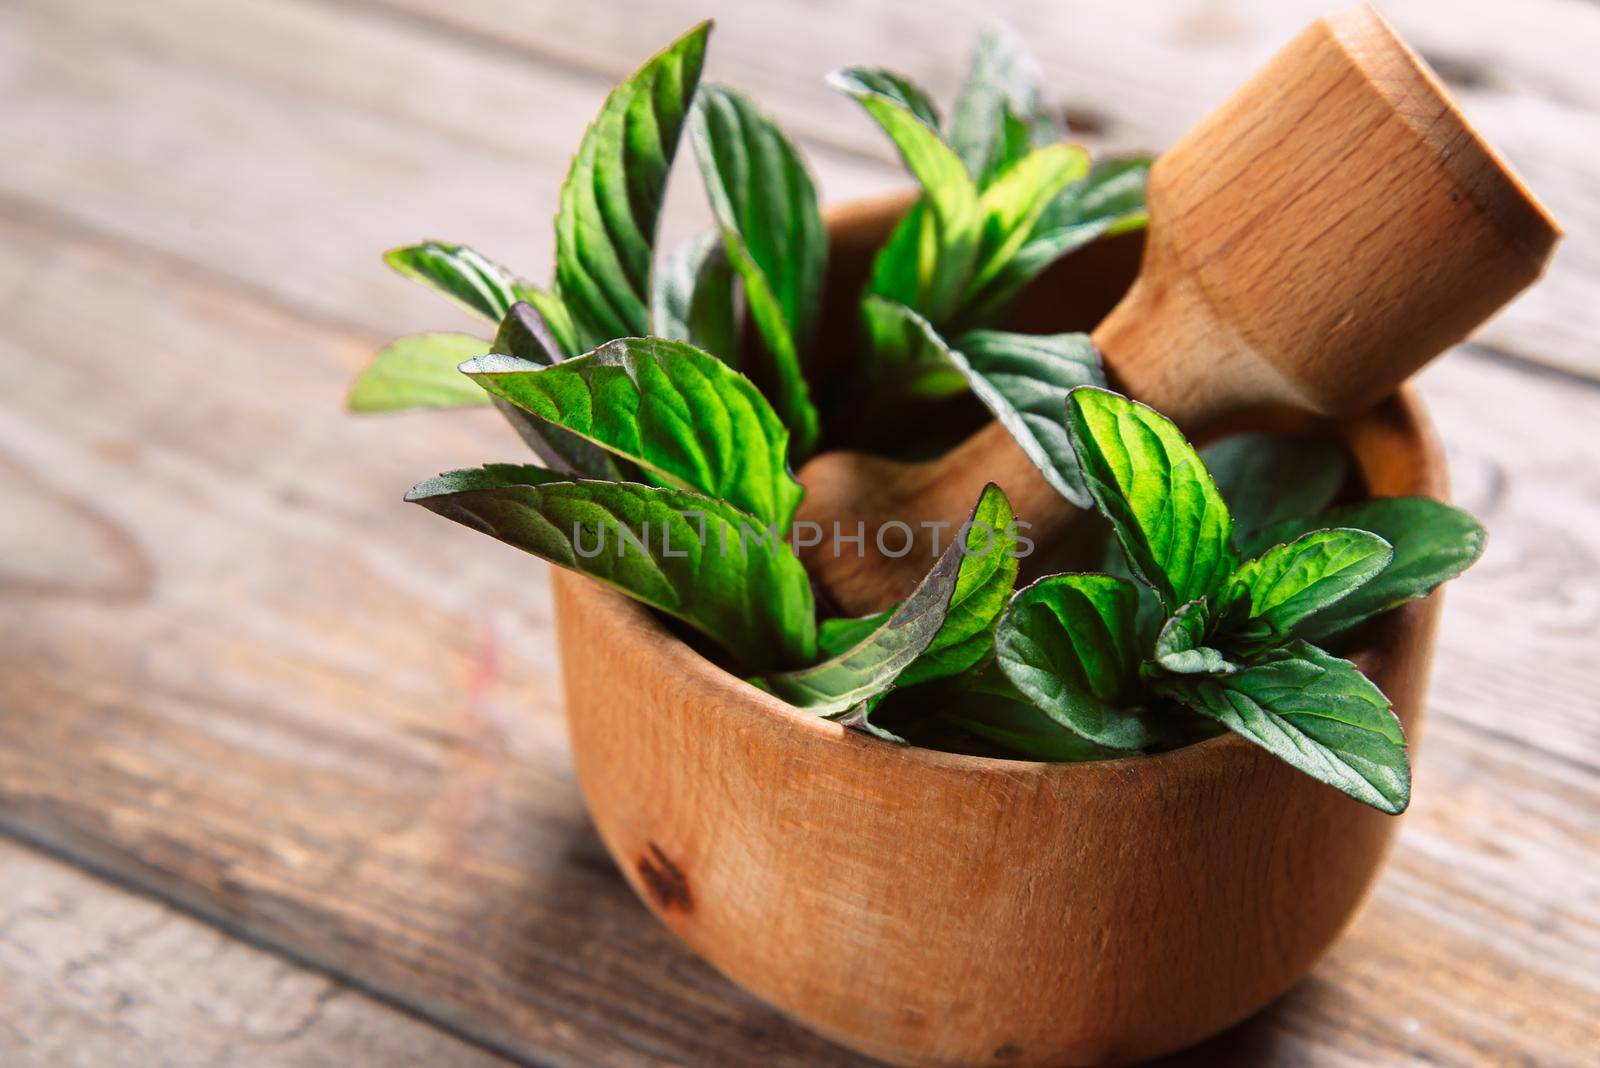 Herb plant in mortar with pestle on wooden background, medicinal herb